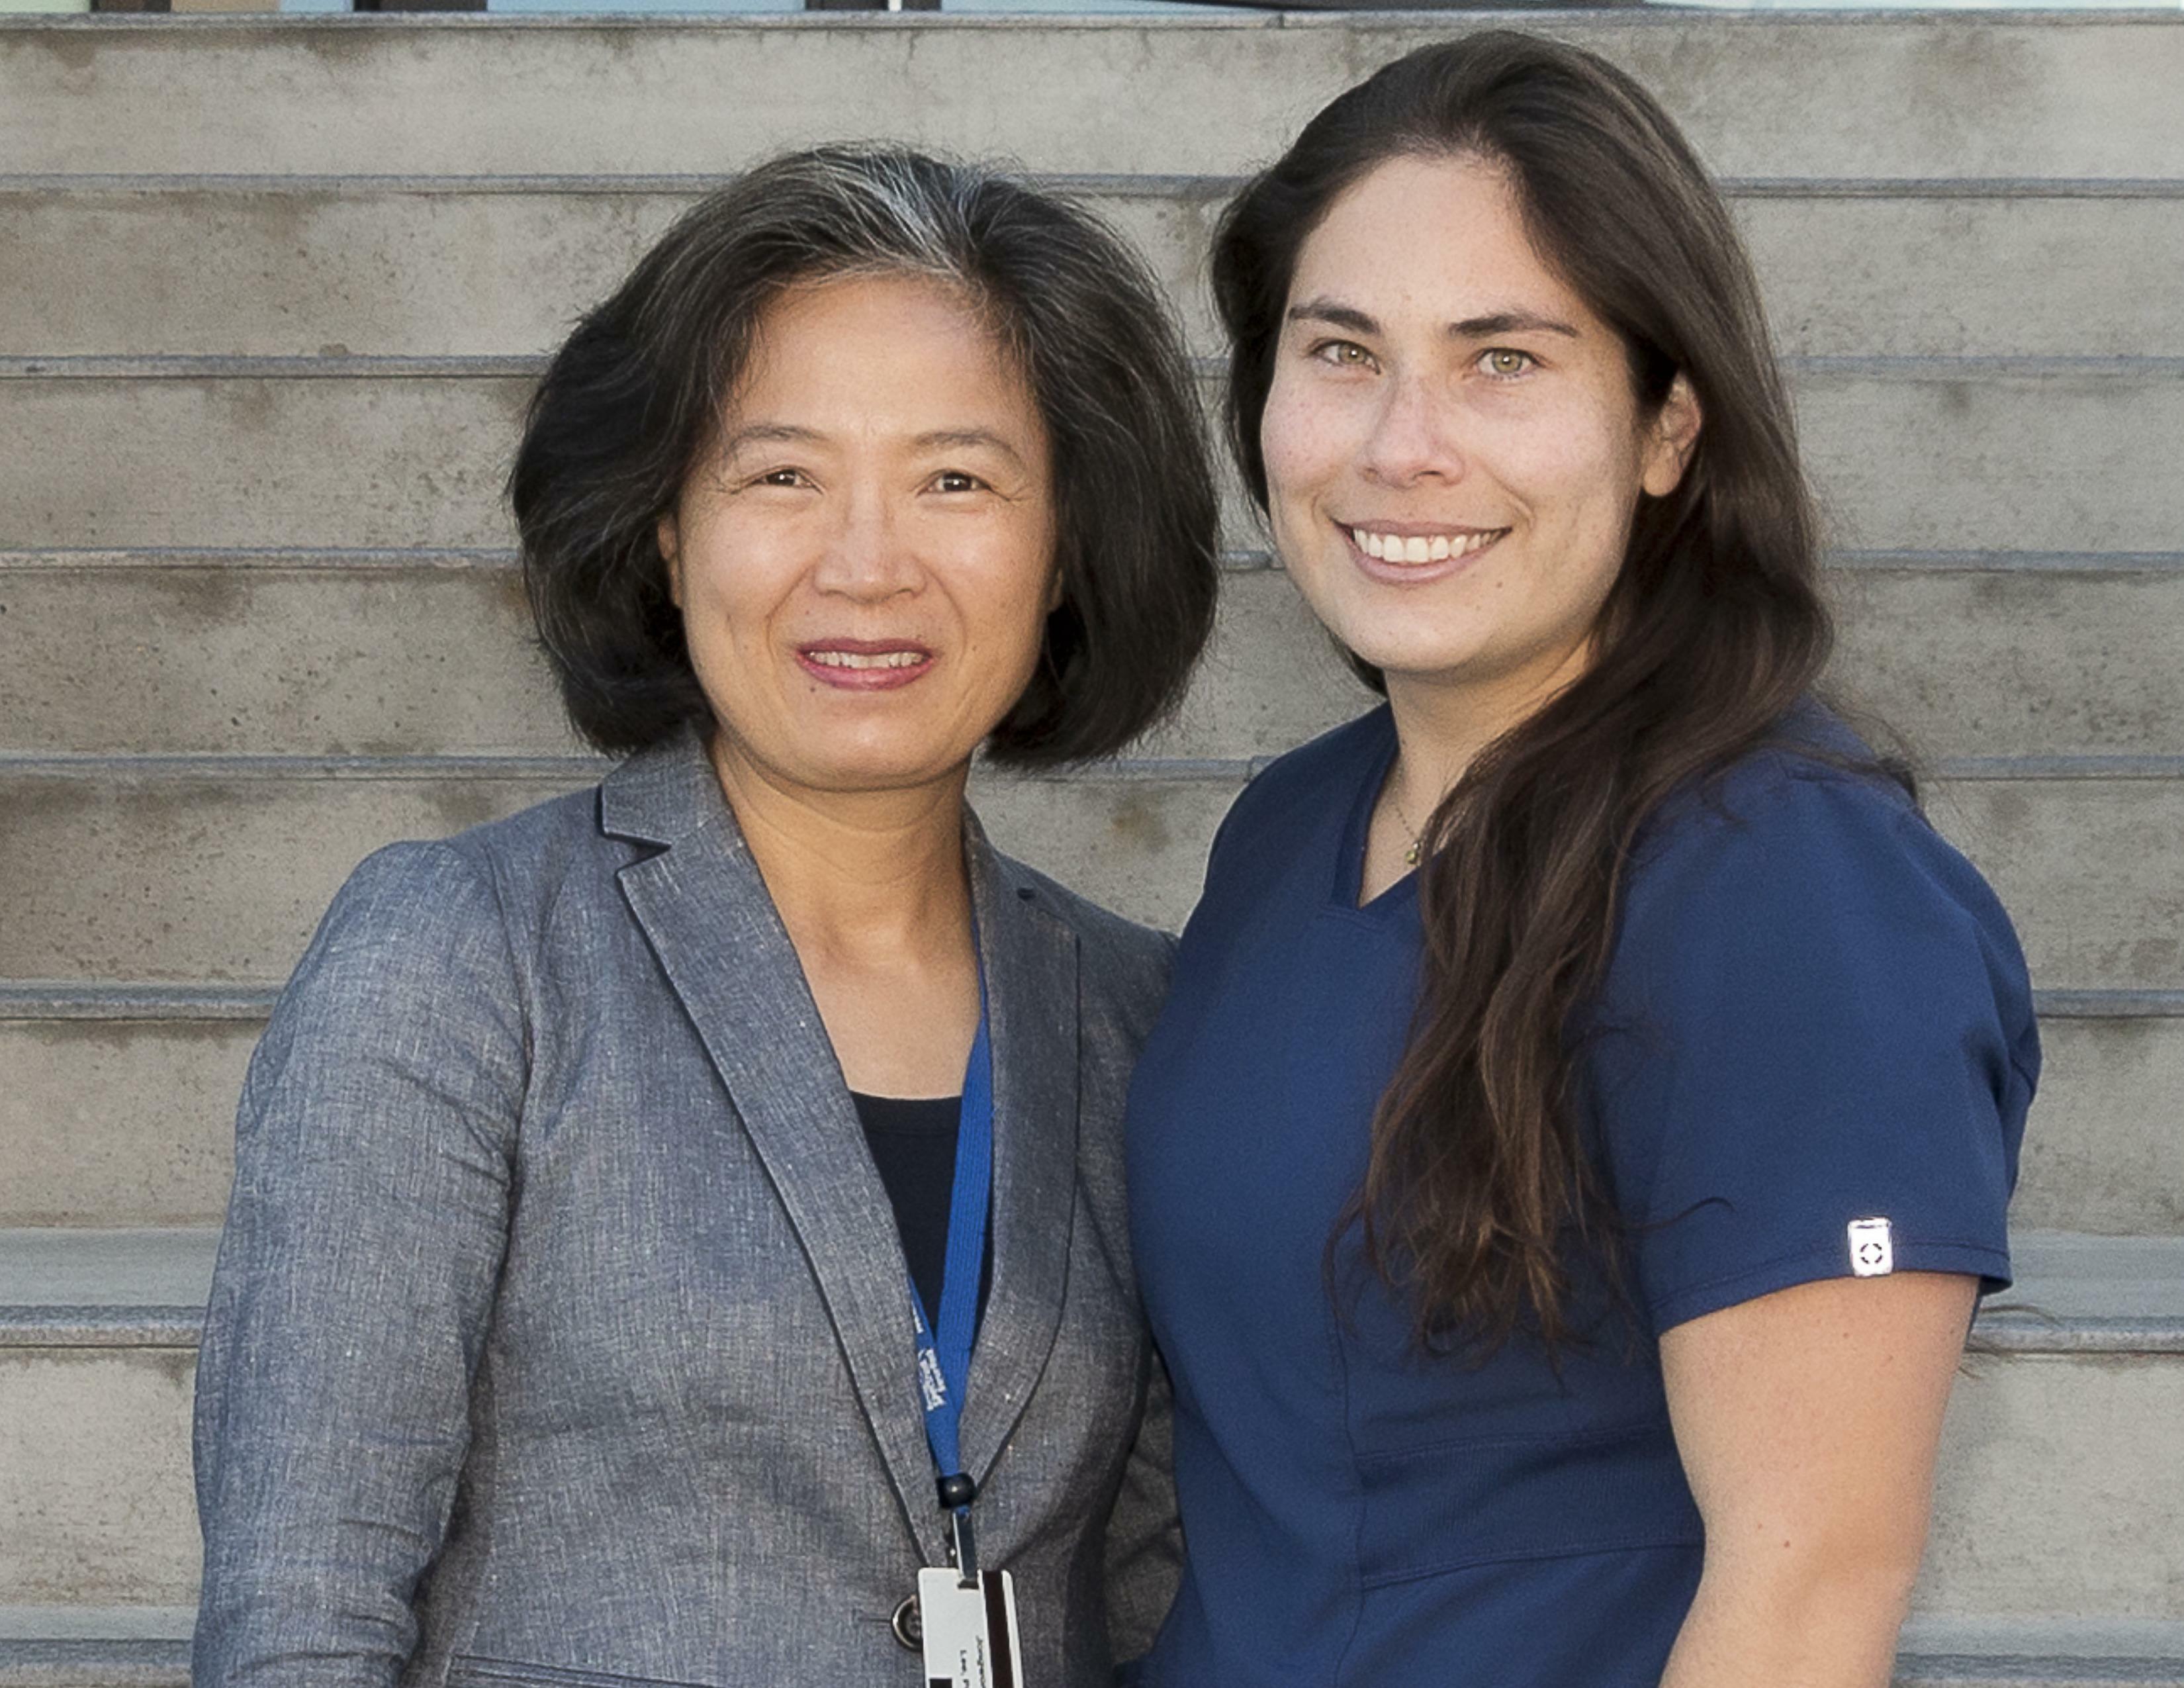 Dr. Lee and Ms. Cardenas